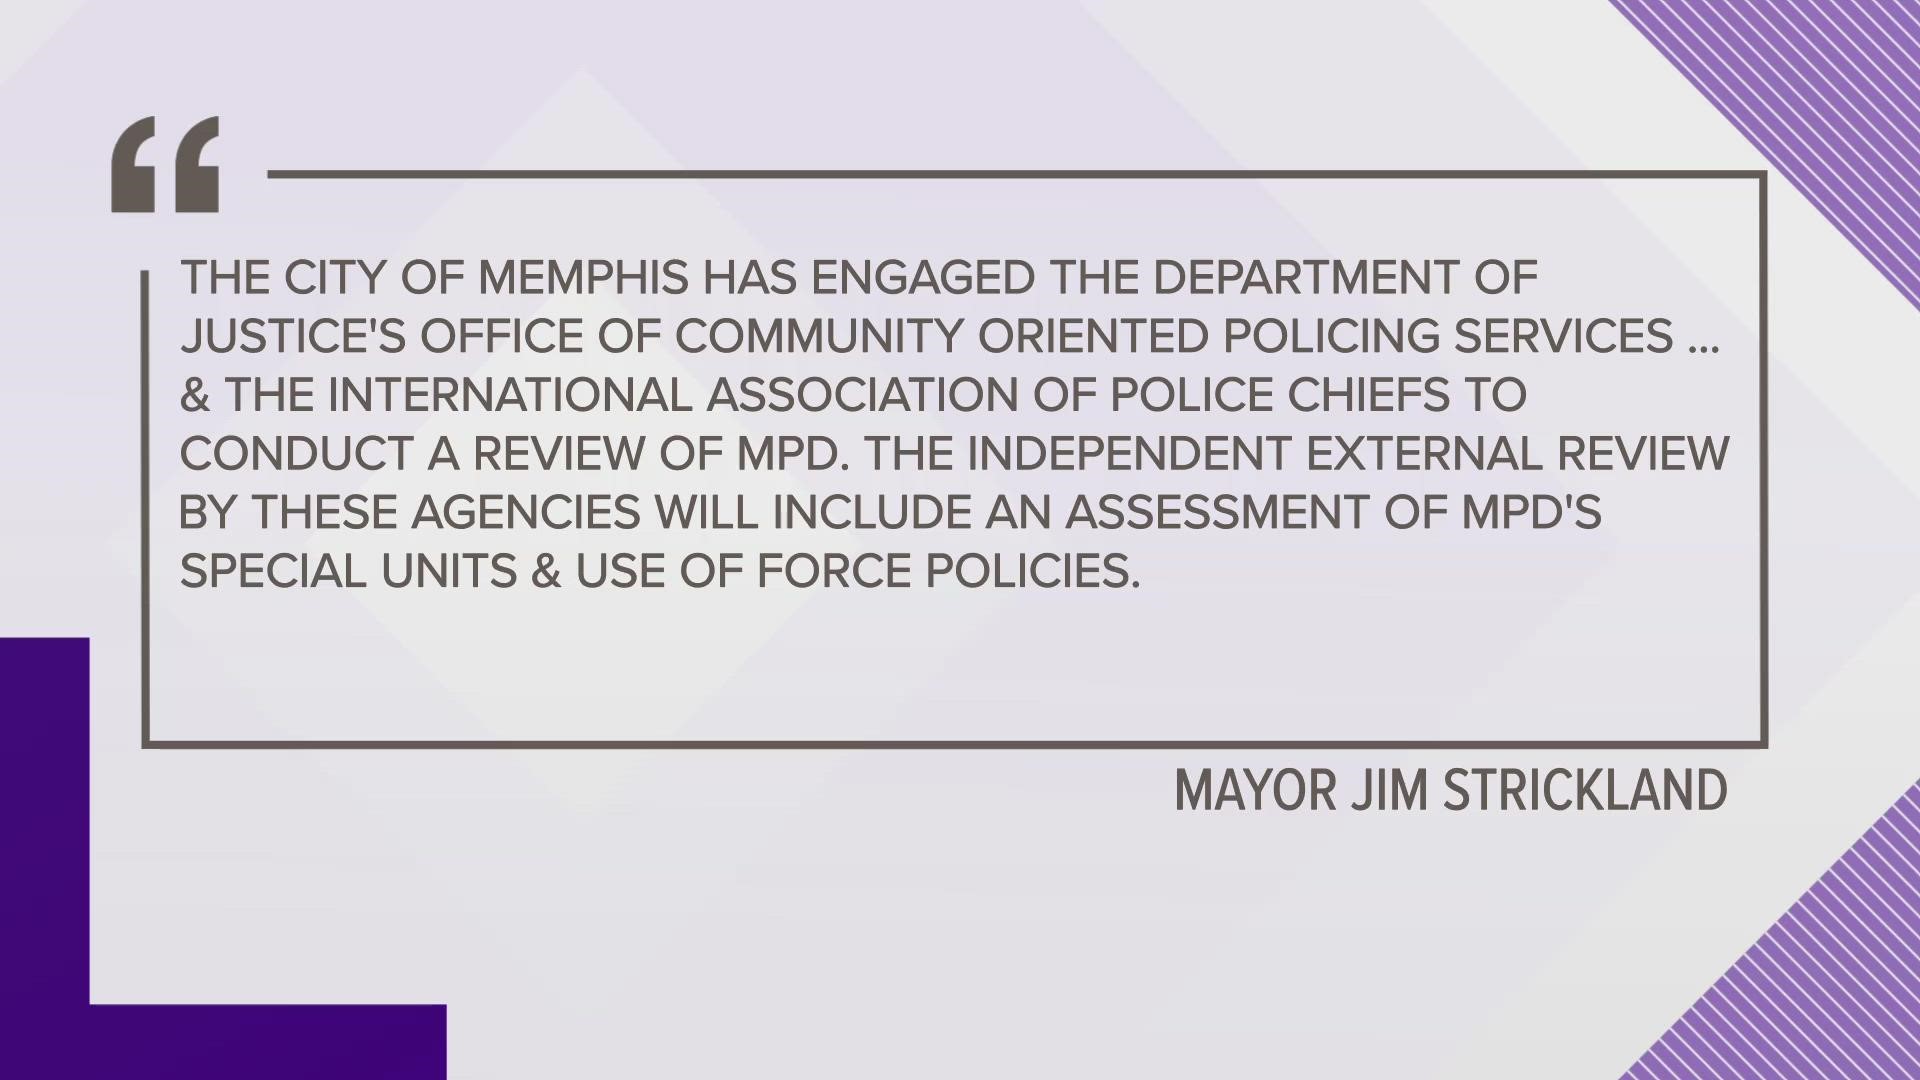 In his weekly email, Mayor Jim Strickland said the review was meant "to honor Tyre and help make sure this type of tragedy does not happen again."